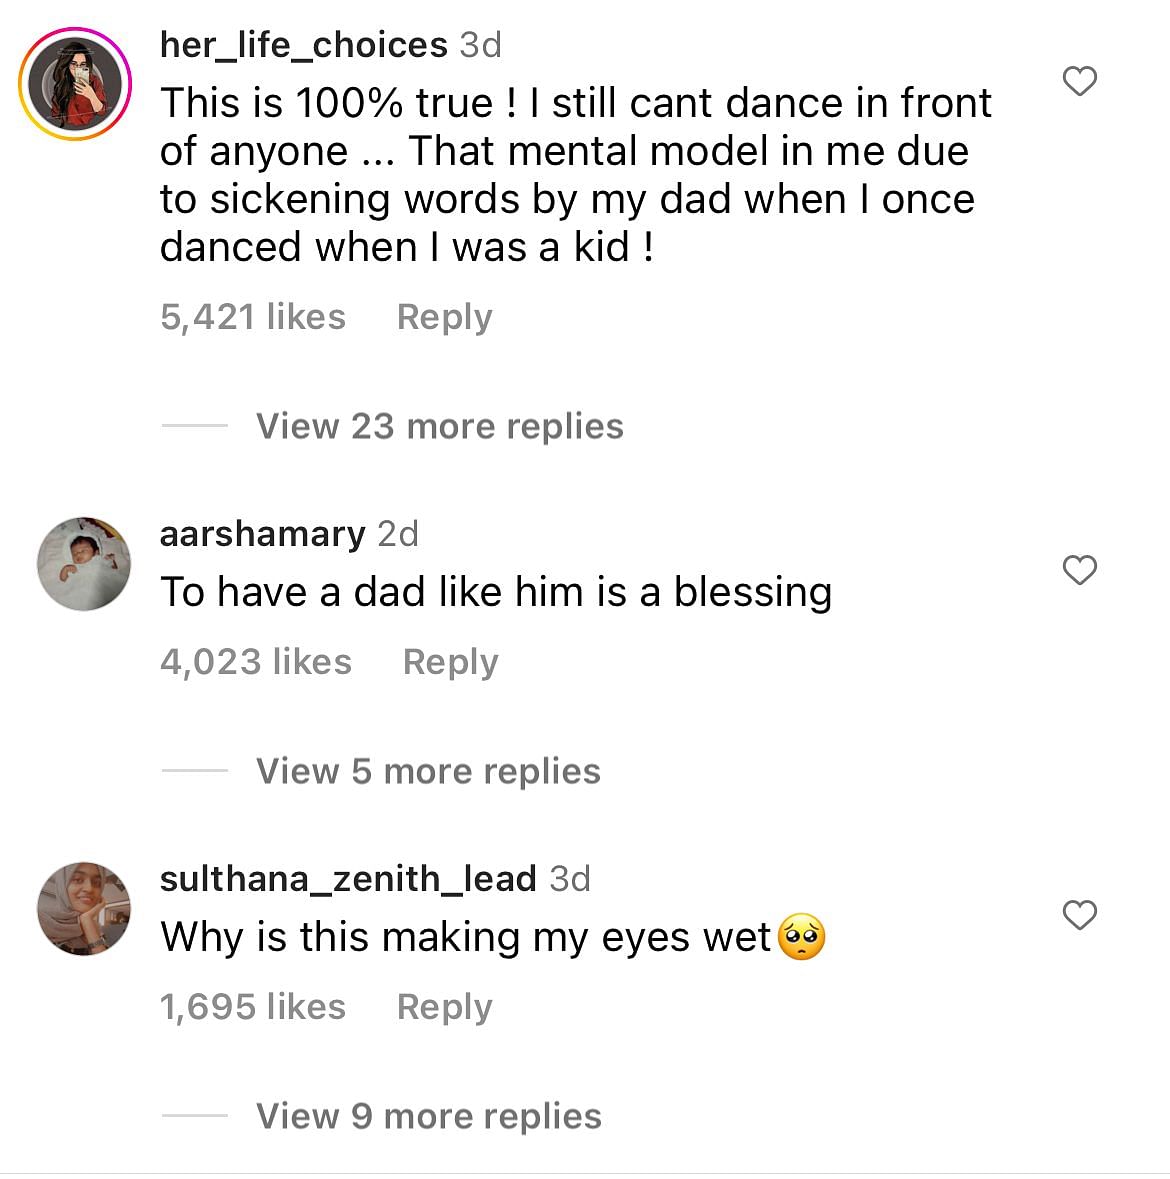 An Instagram user commented under the now-viral video, "To have a dad like him is a blessing".